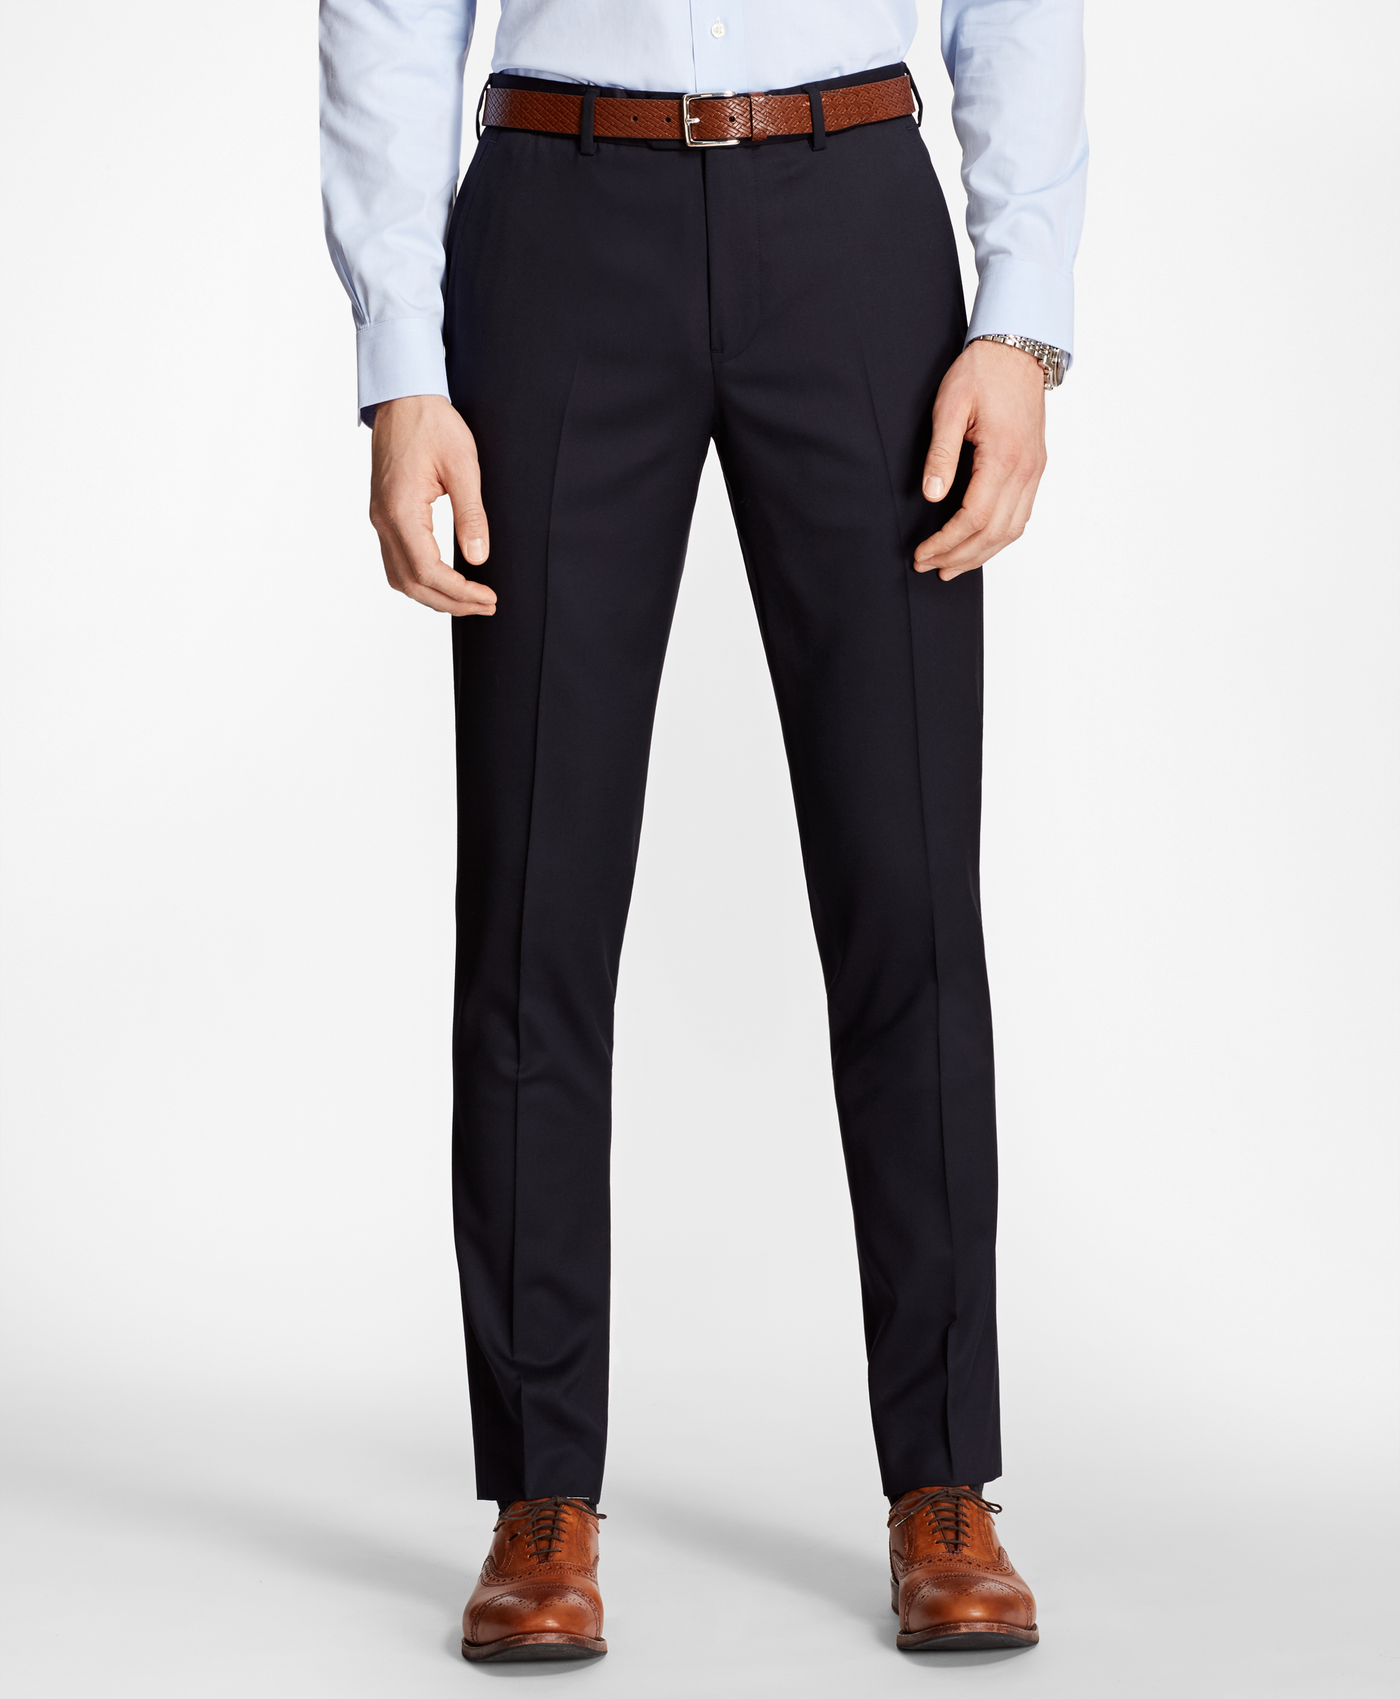 Milano Fit Stretch Wool Two-Button 1818 Suit - Brooks Brothers Canada